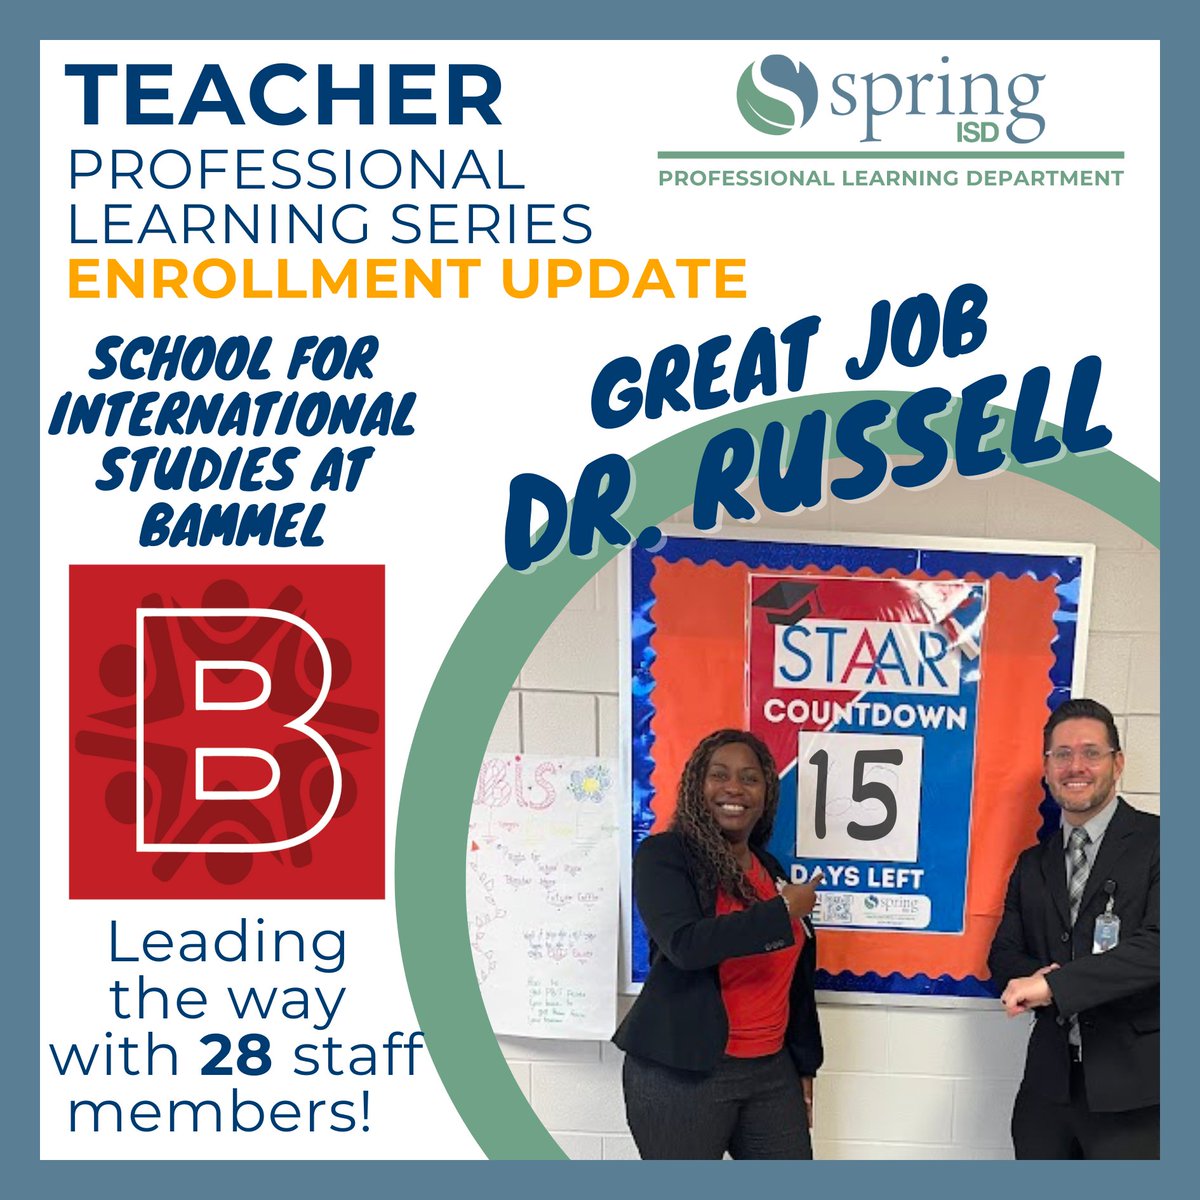 Big shout out to @SISBPatriots and @DrTrennRussell for the largest number of teachers enrolled in our upcoming event this Thursday. Follow their lead and use these effective and practical sessions to support your teachers and students on STAAR! #WeAreSpring #Unstoppable